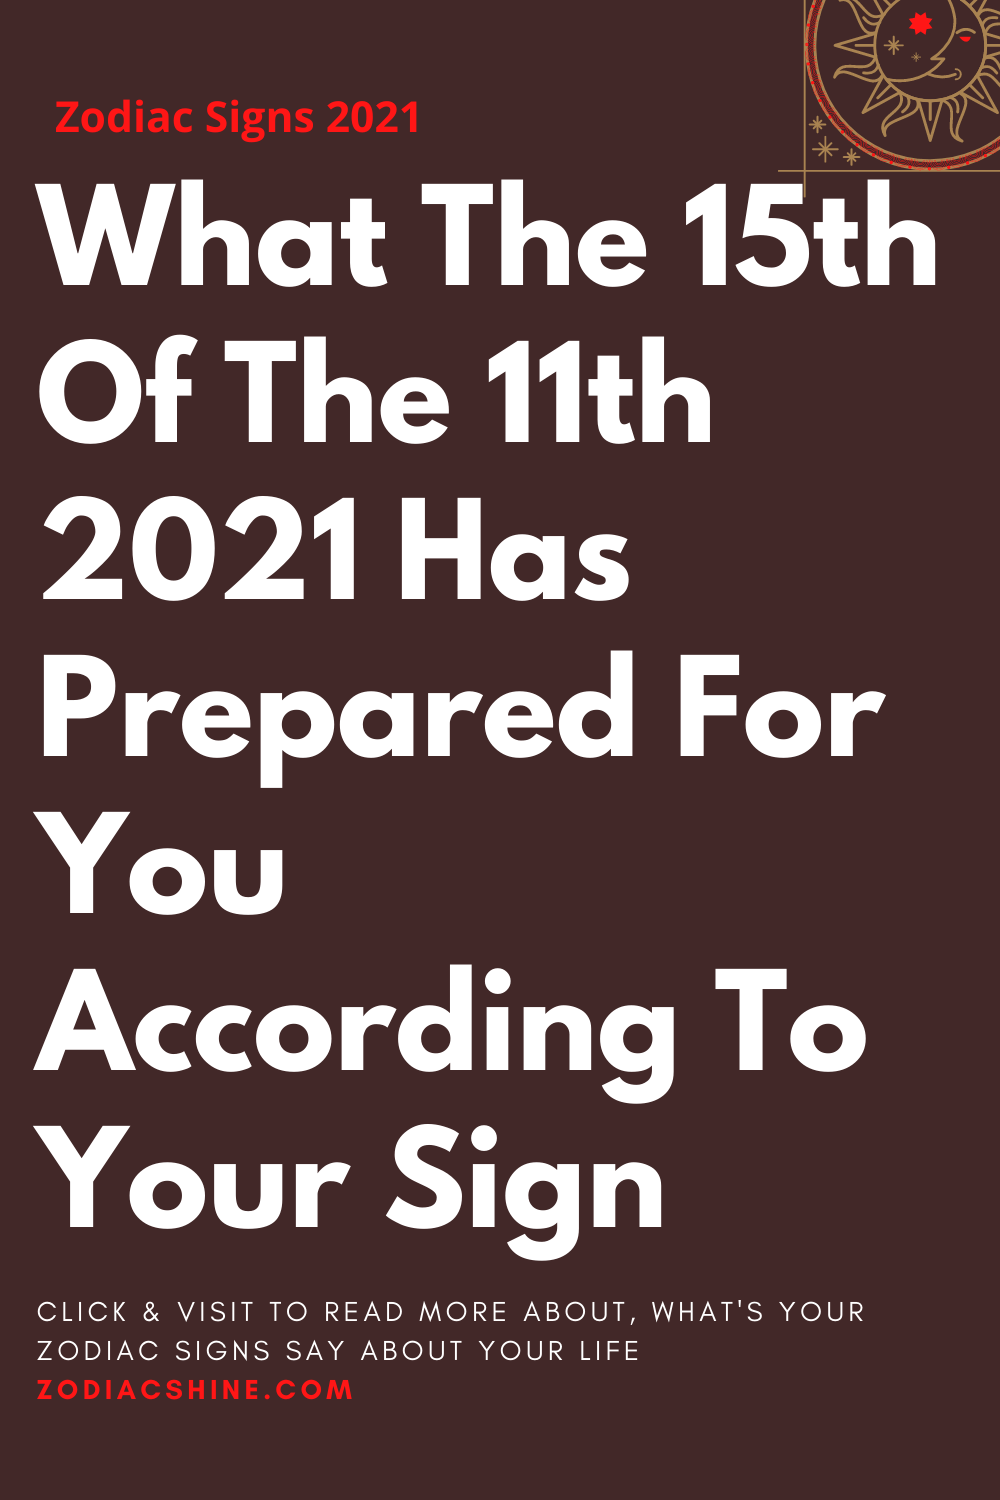 What The 15th Of The 11th 2021 Has Prepared For You According To Your Sign